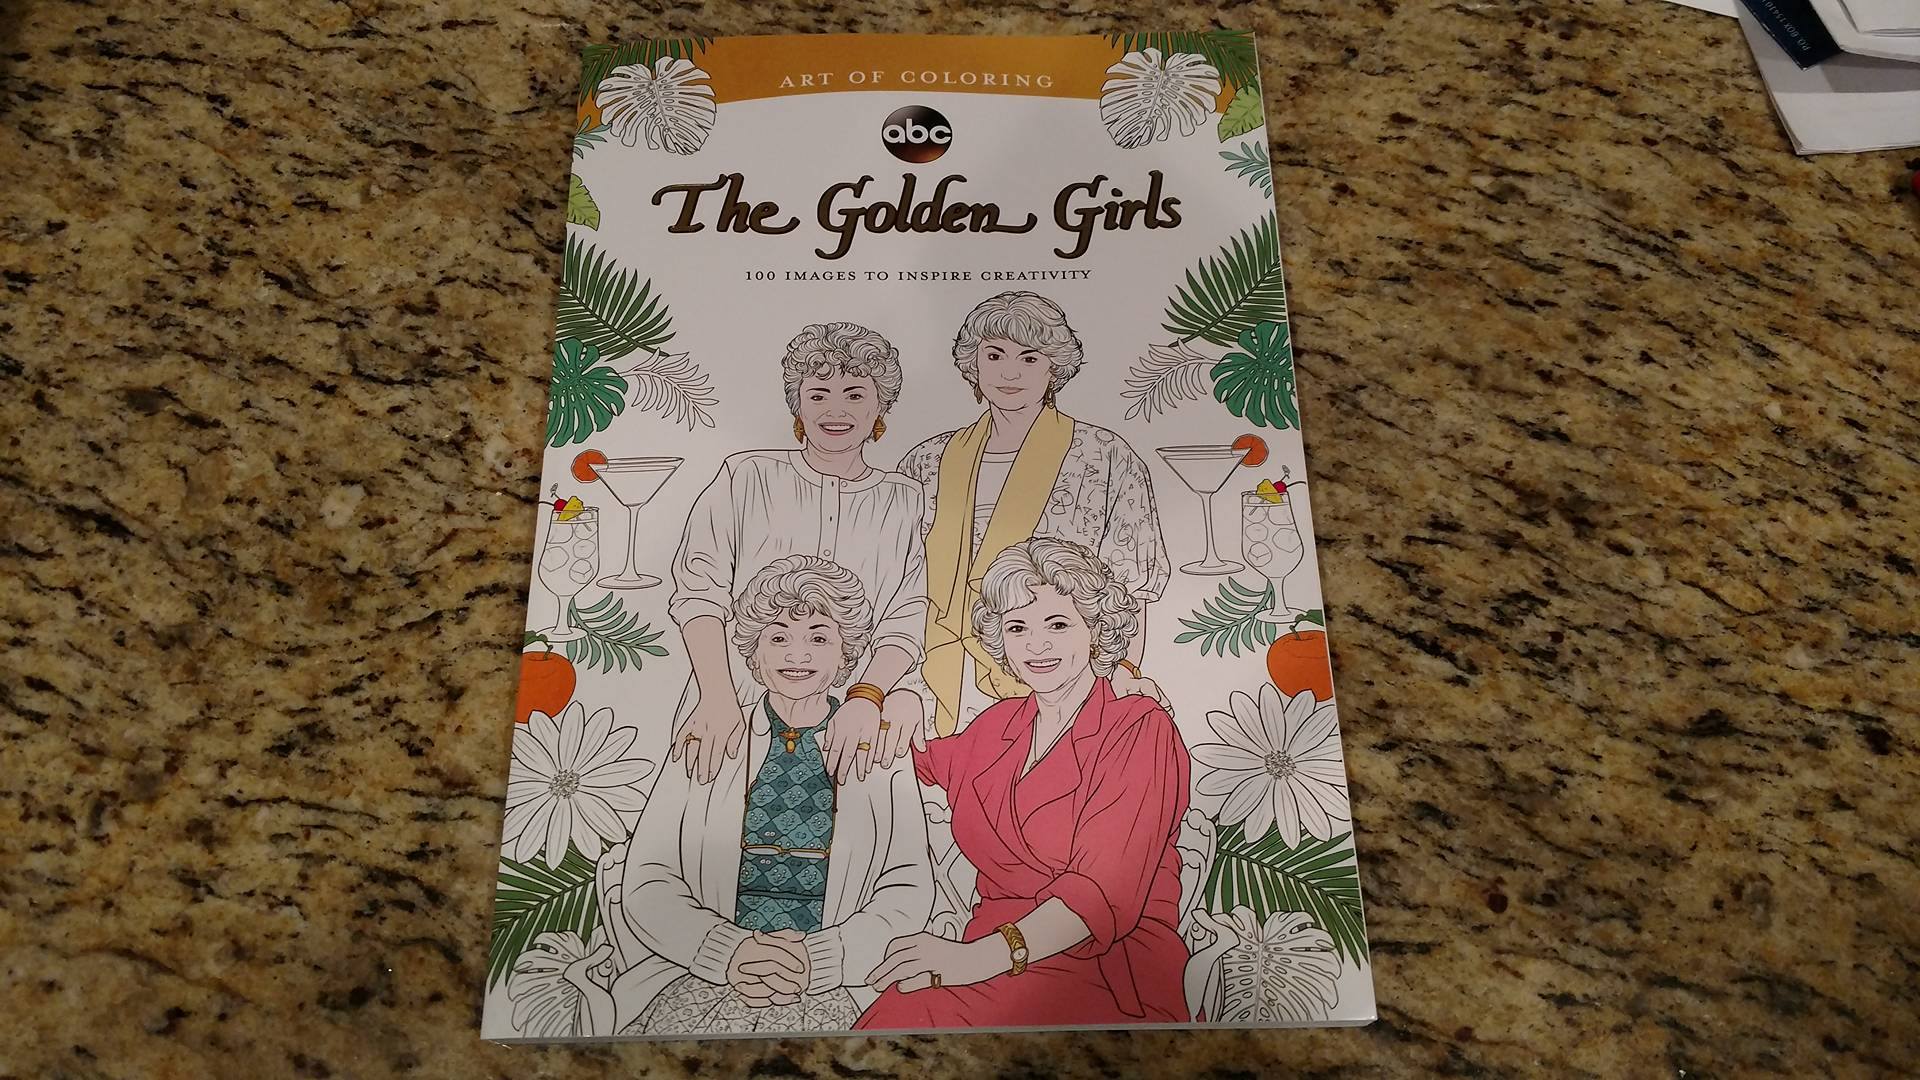 Art of Coloring Presents: The Golden Girls Coloring Book